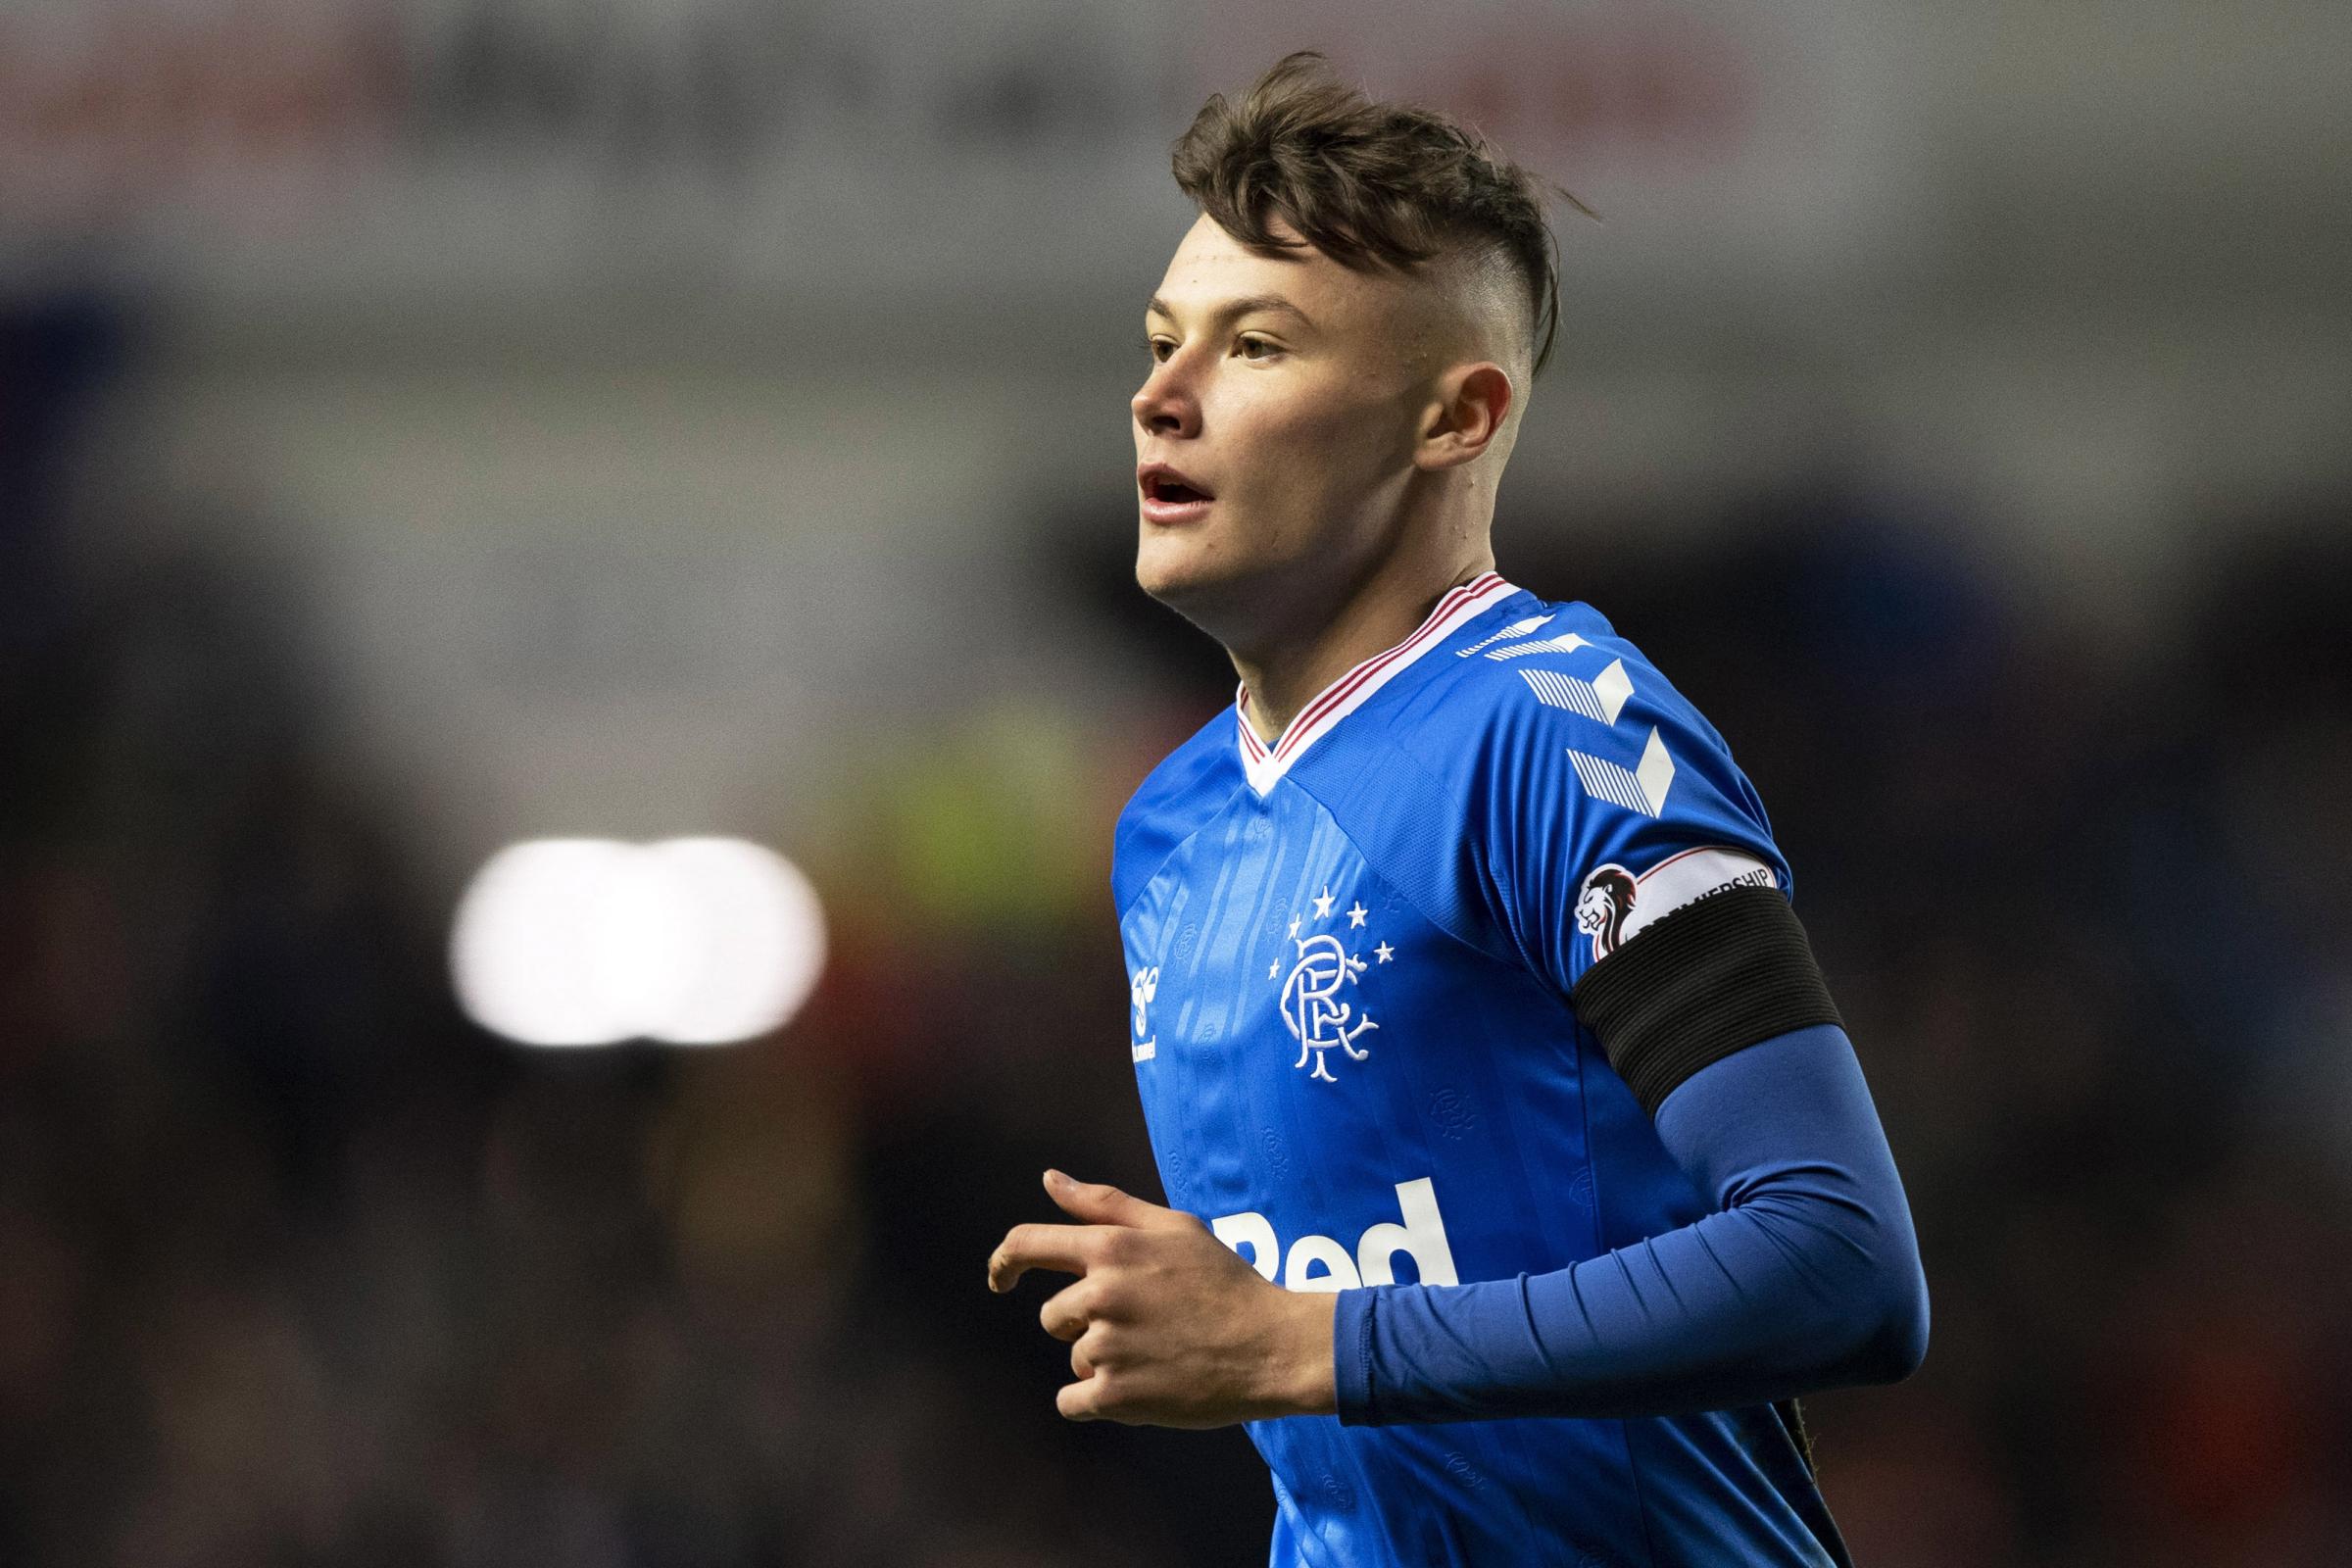 Rangers defender Nathan Patterson to self-isolate following Scotland Under-21 Coronavirus scares